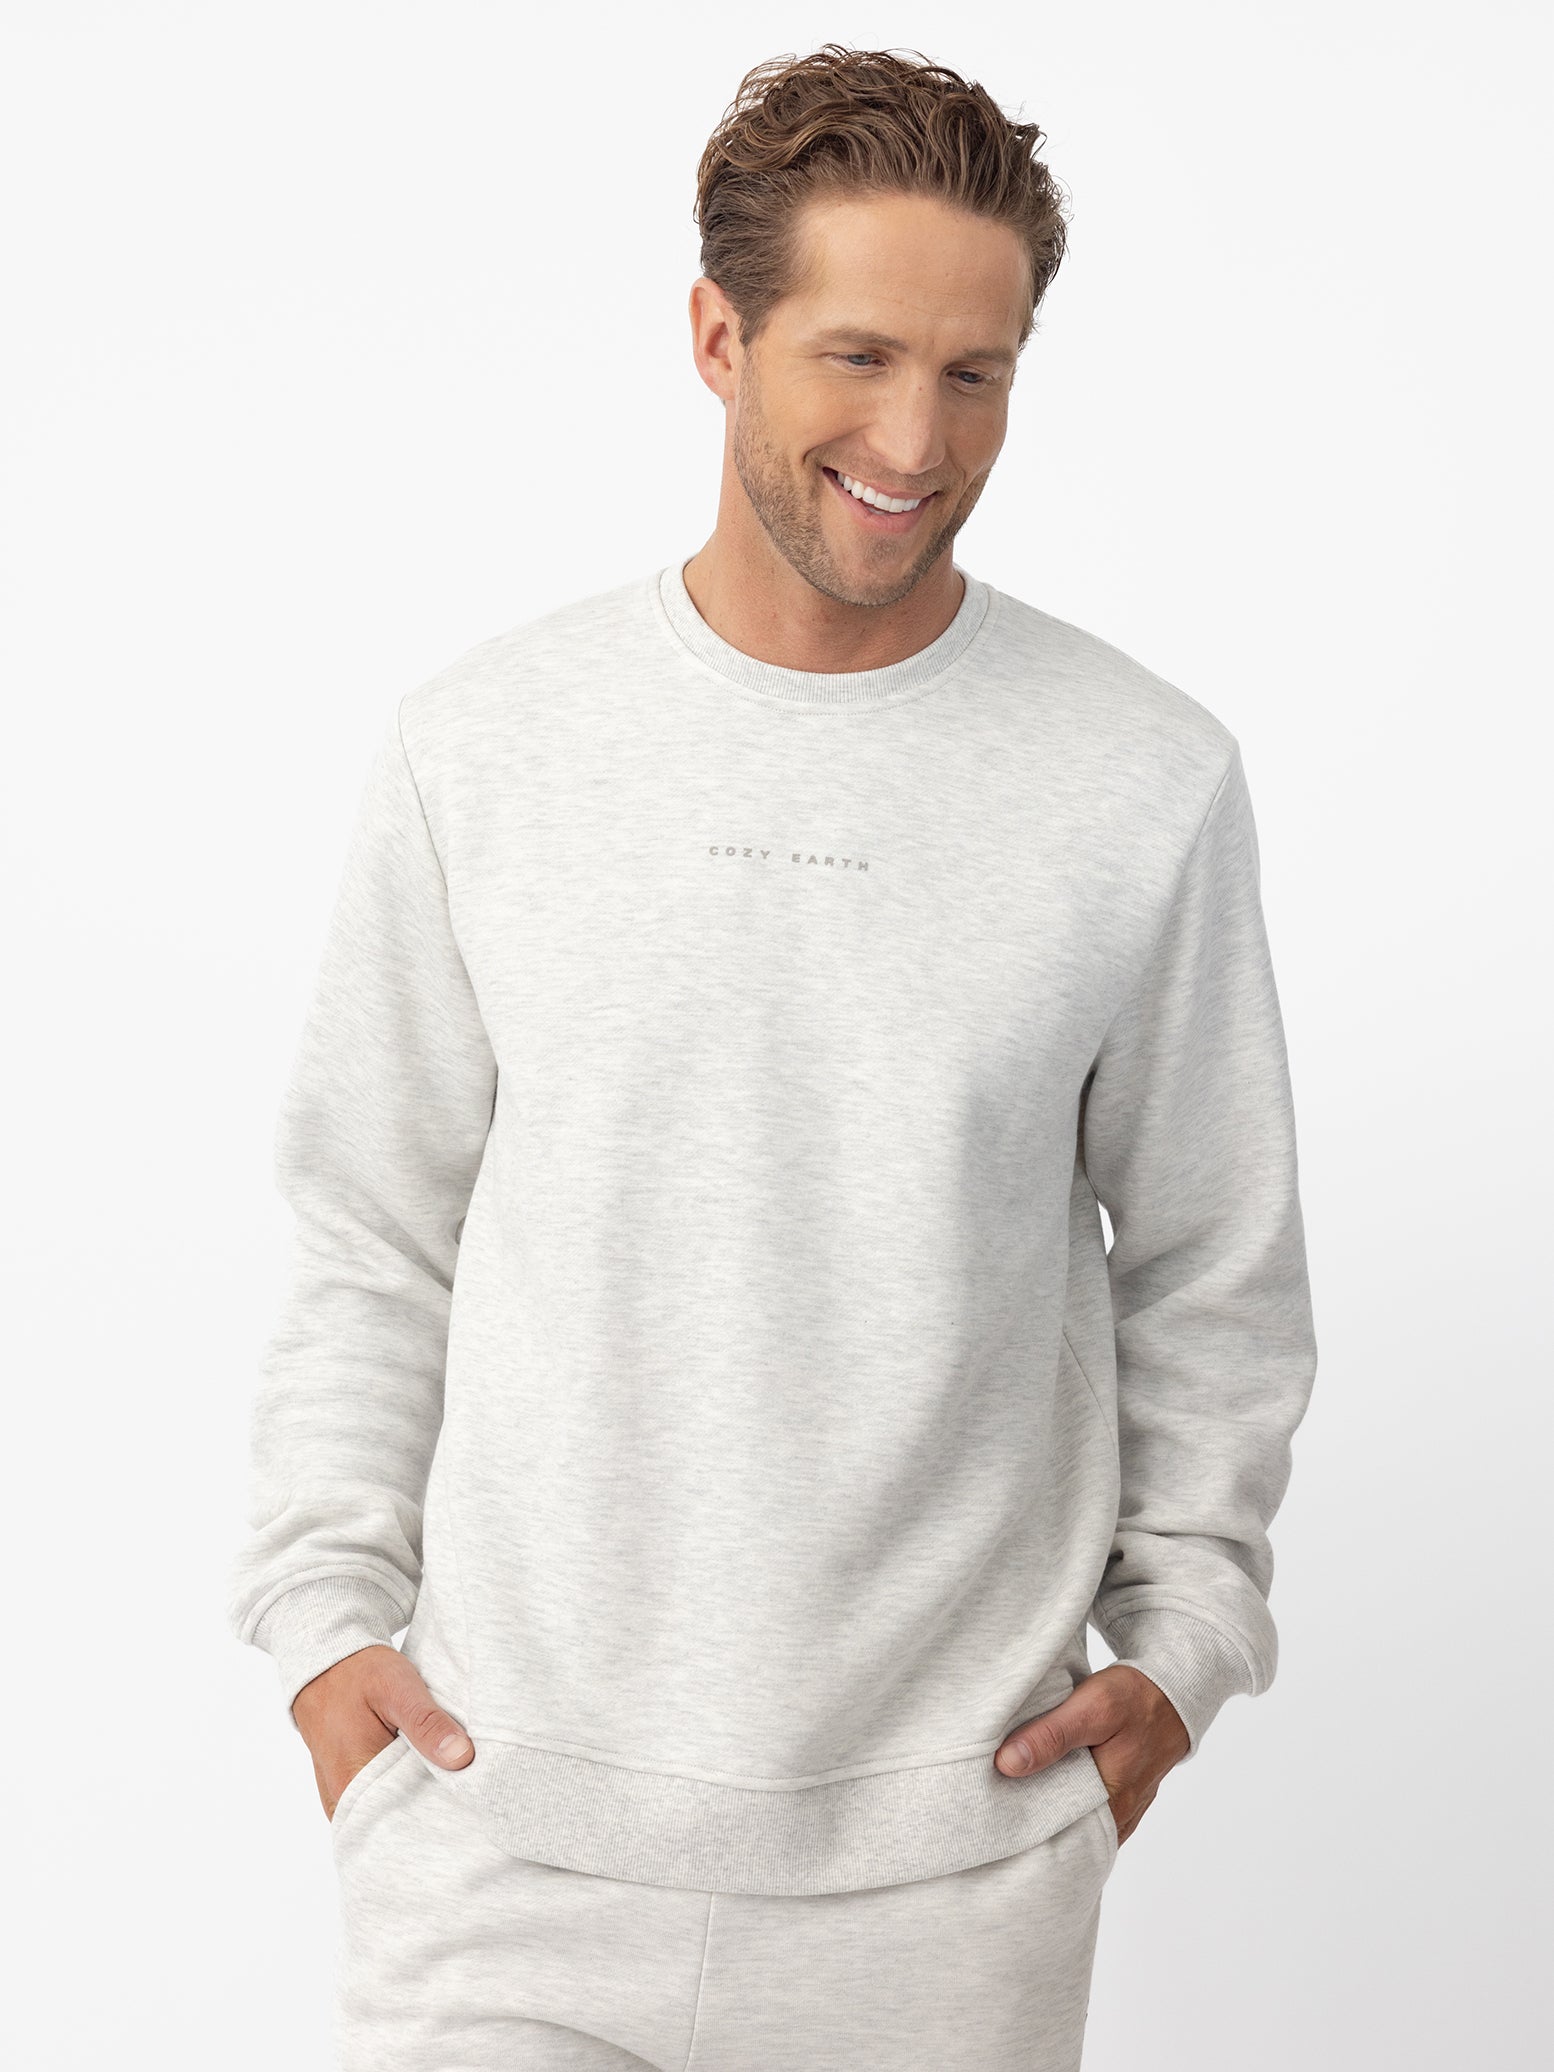 Man wearing heather grey cityscape pullover with white background 